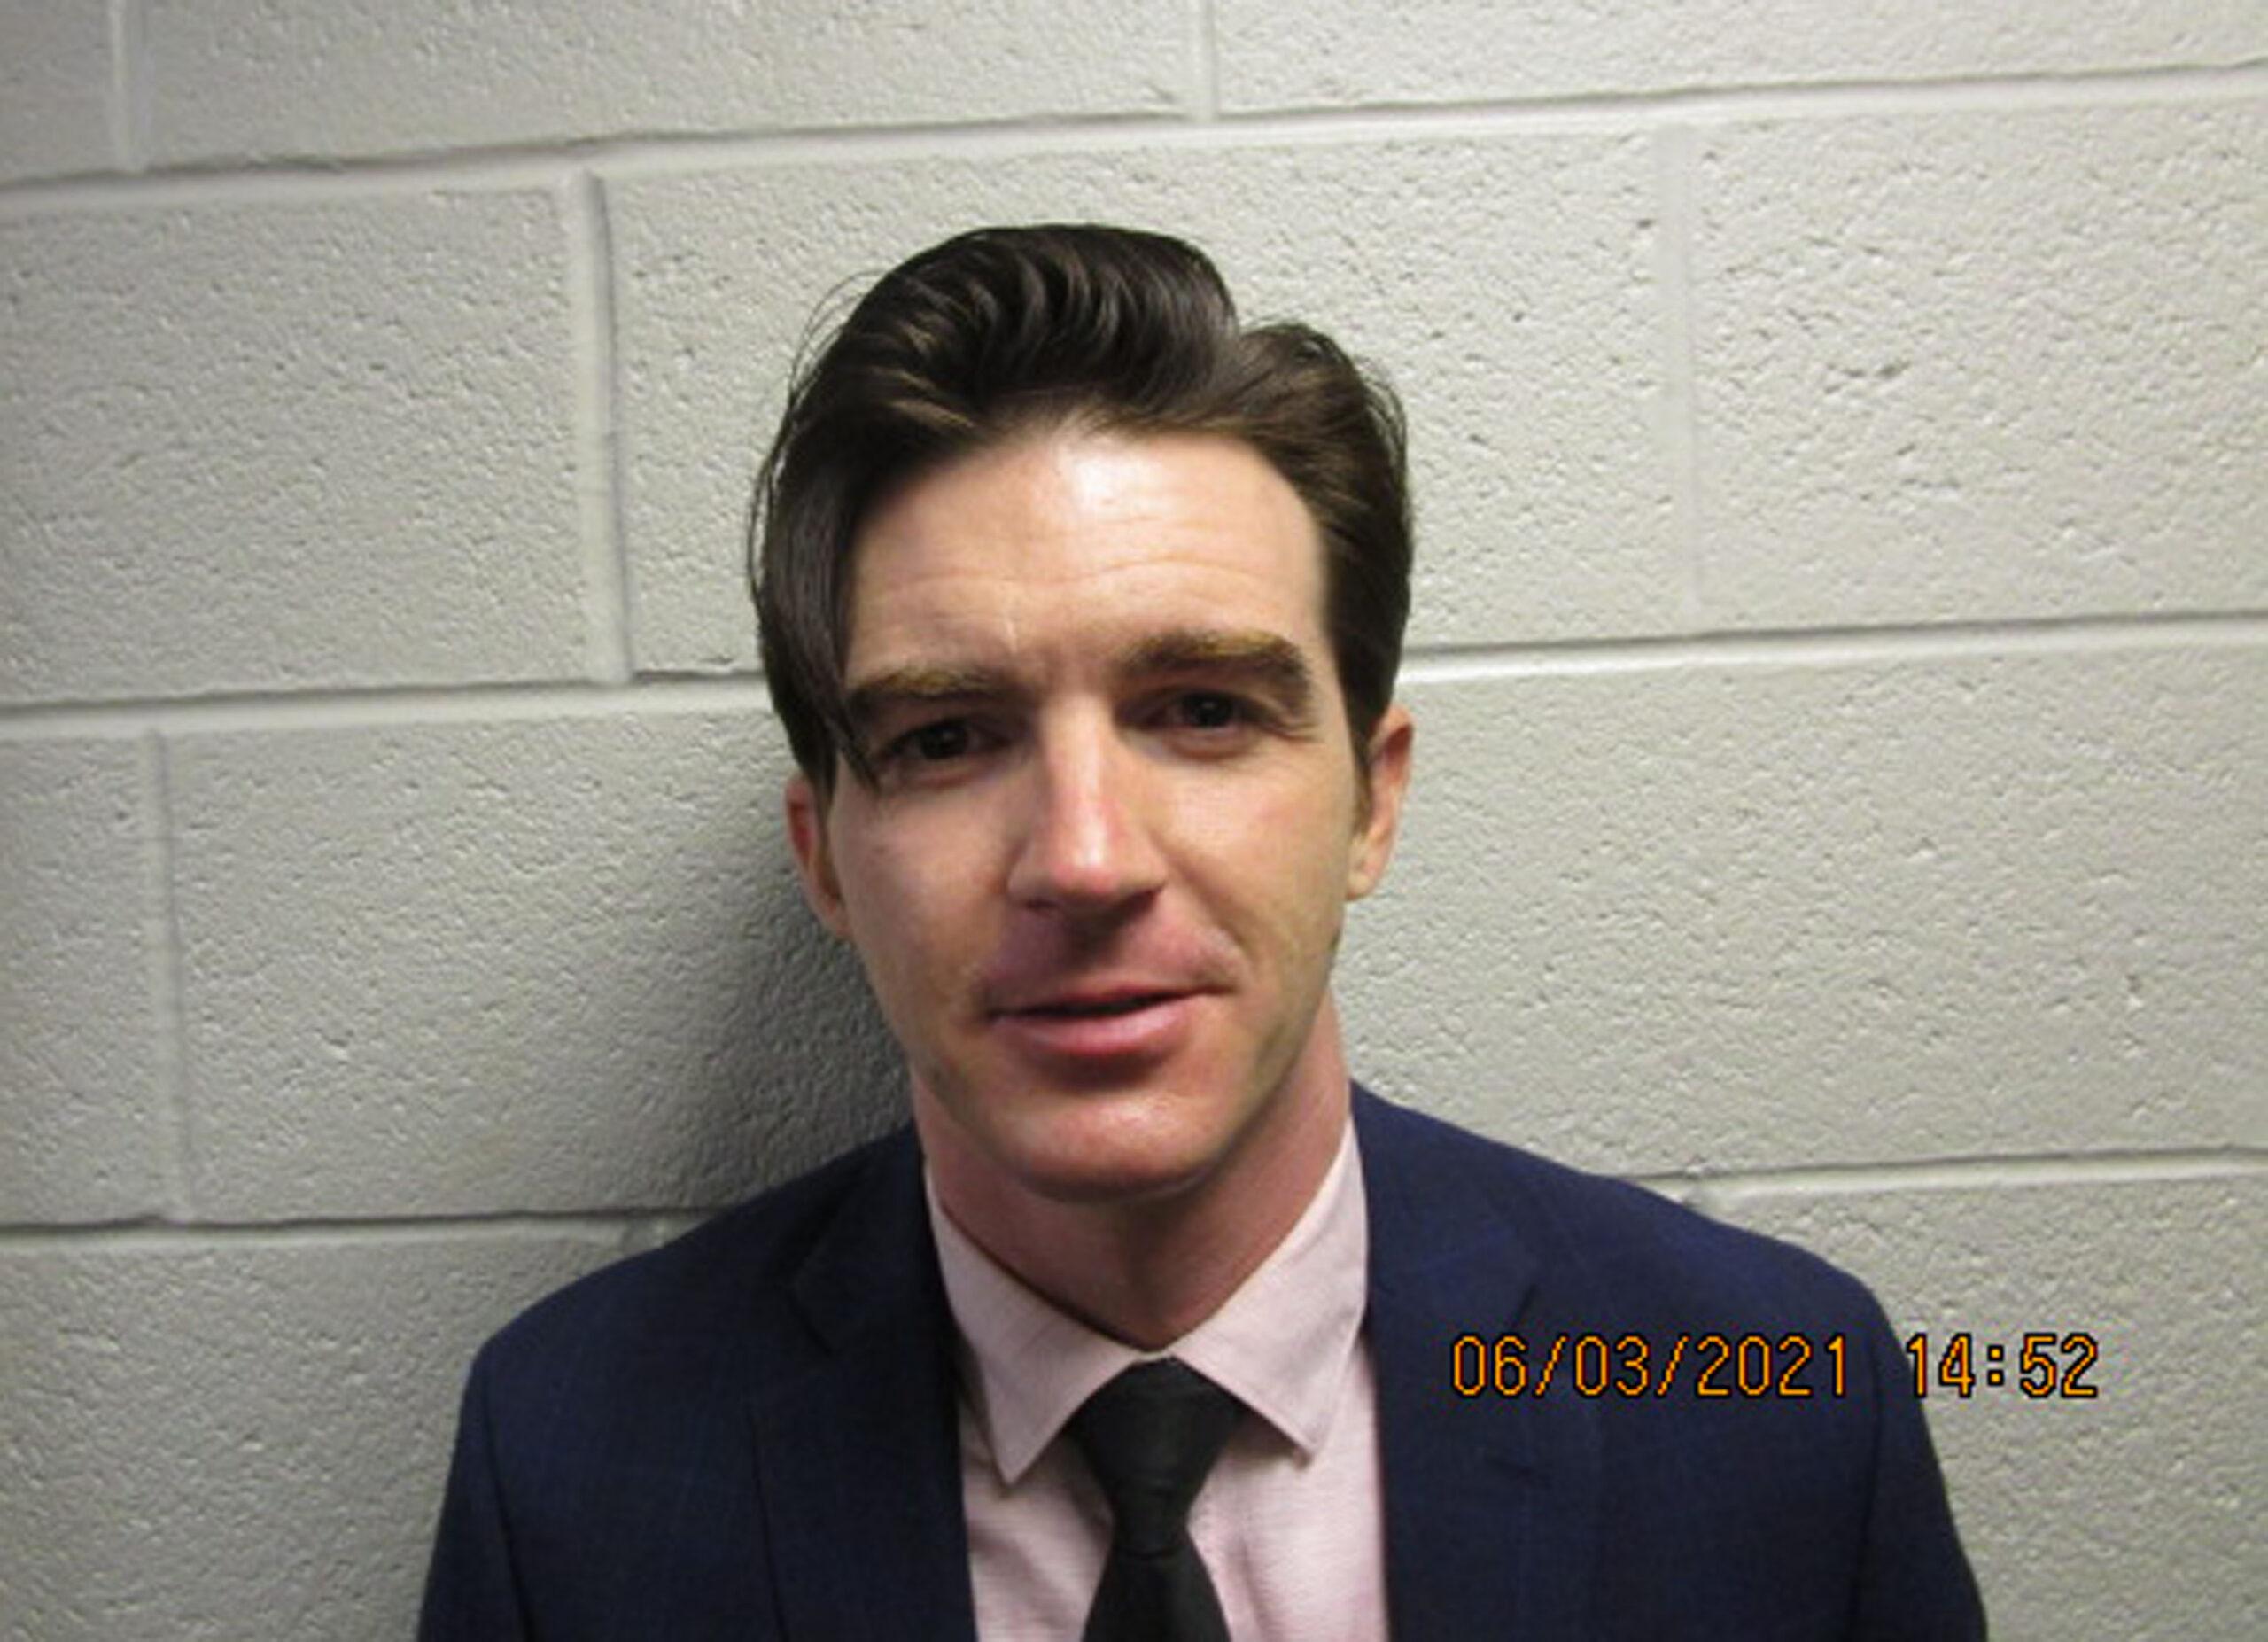 Former Drake amp Josh star Drake Bell arrested and charged with attempted child endangerment and disseminating matter harmful to juveniles